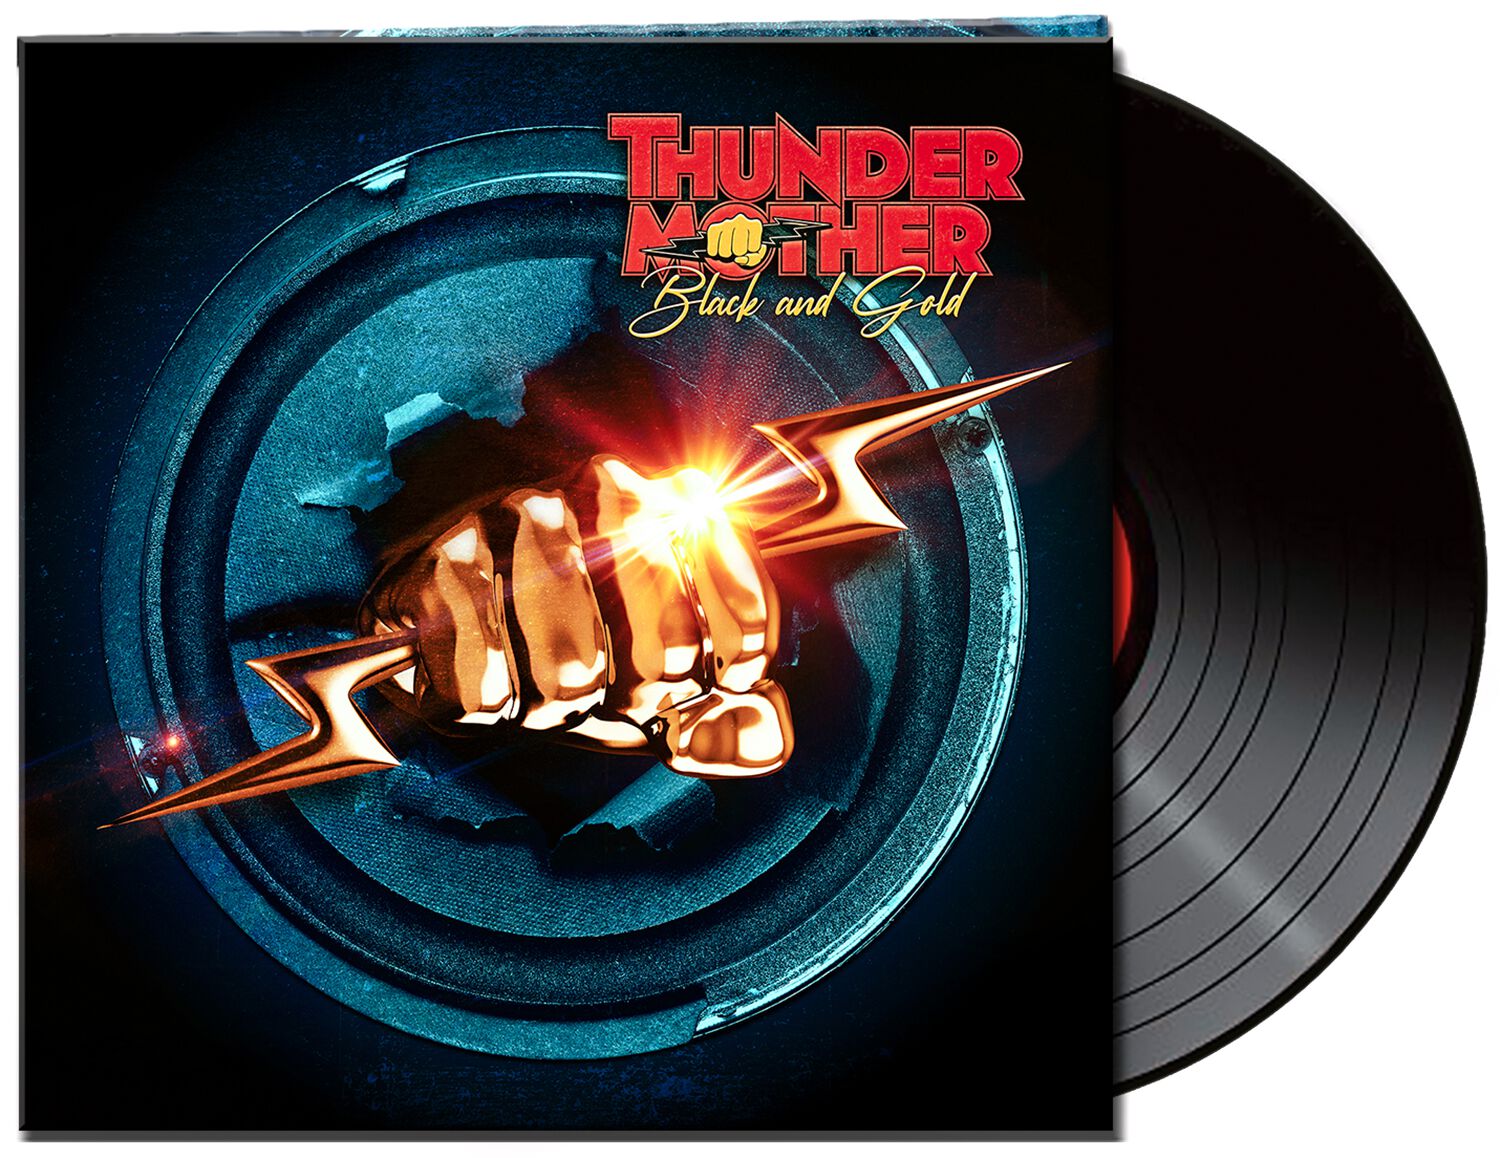 Thundermother Black and gold LP schwarz